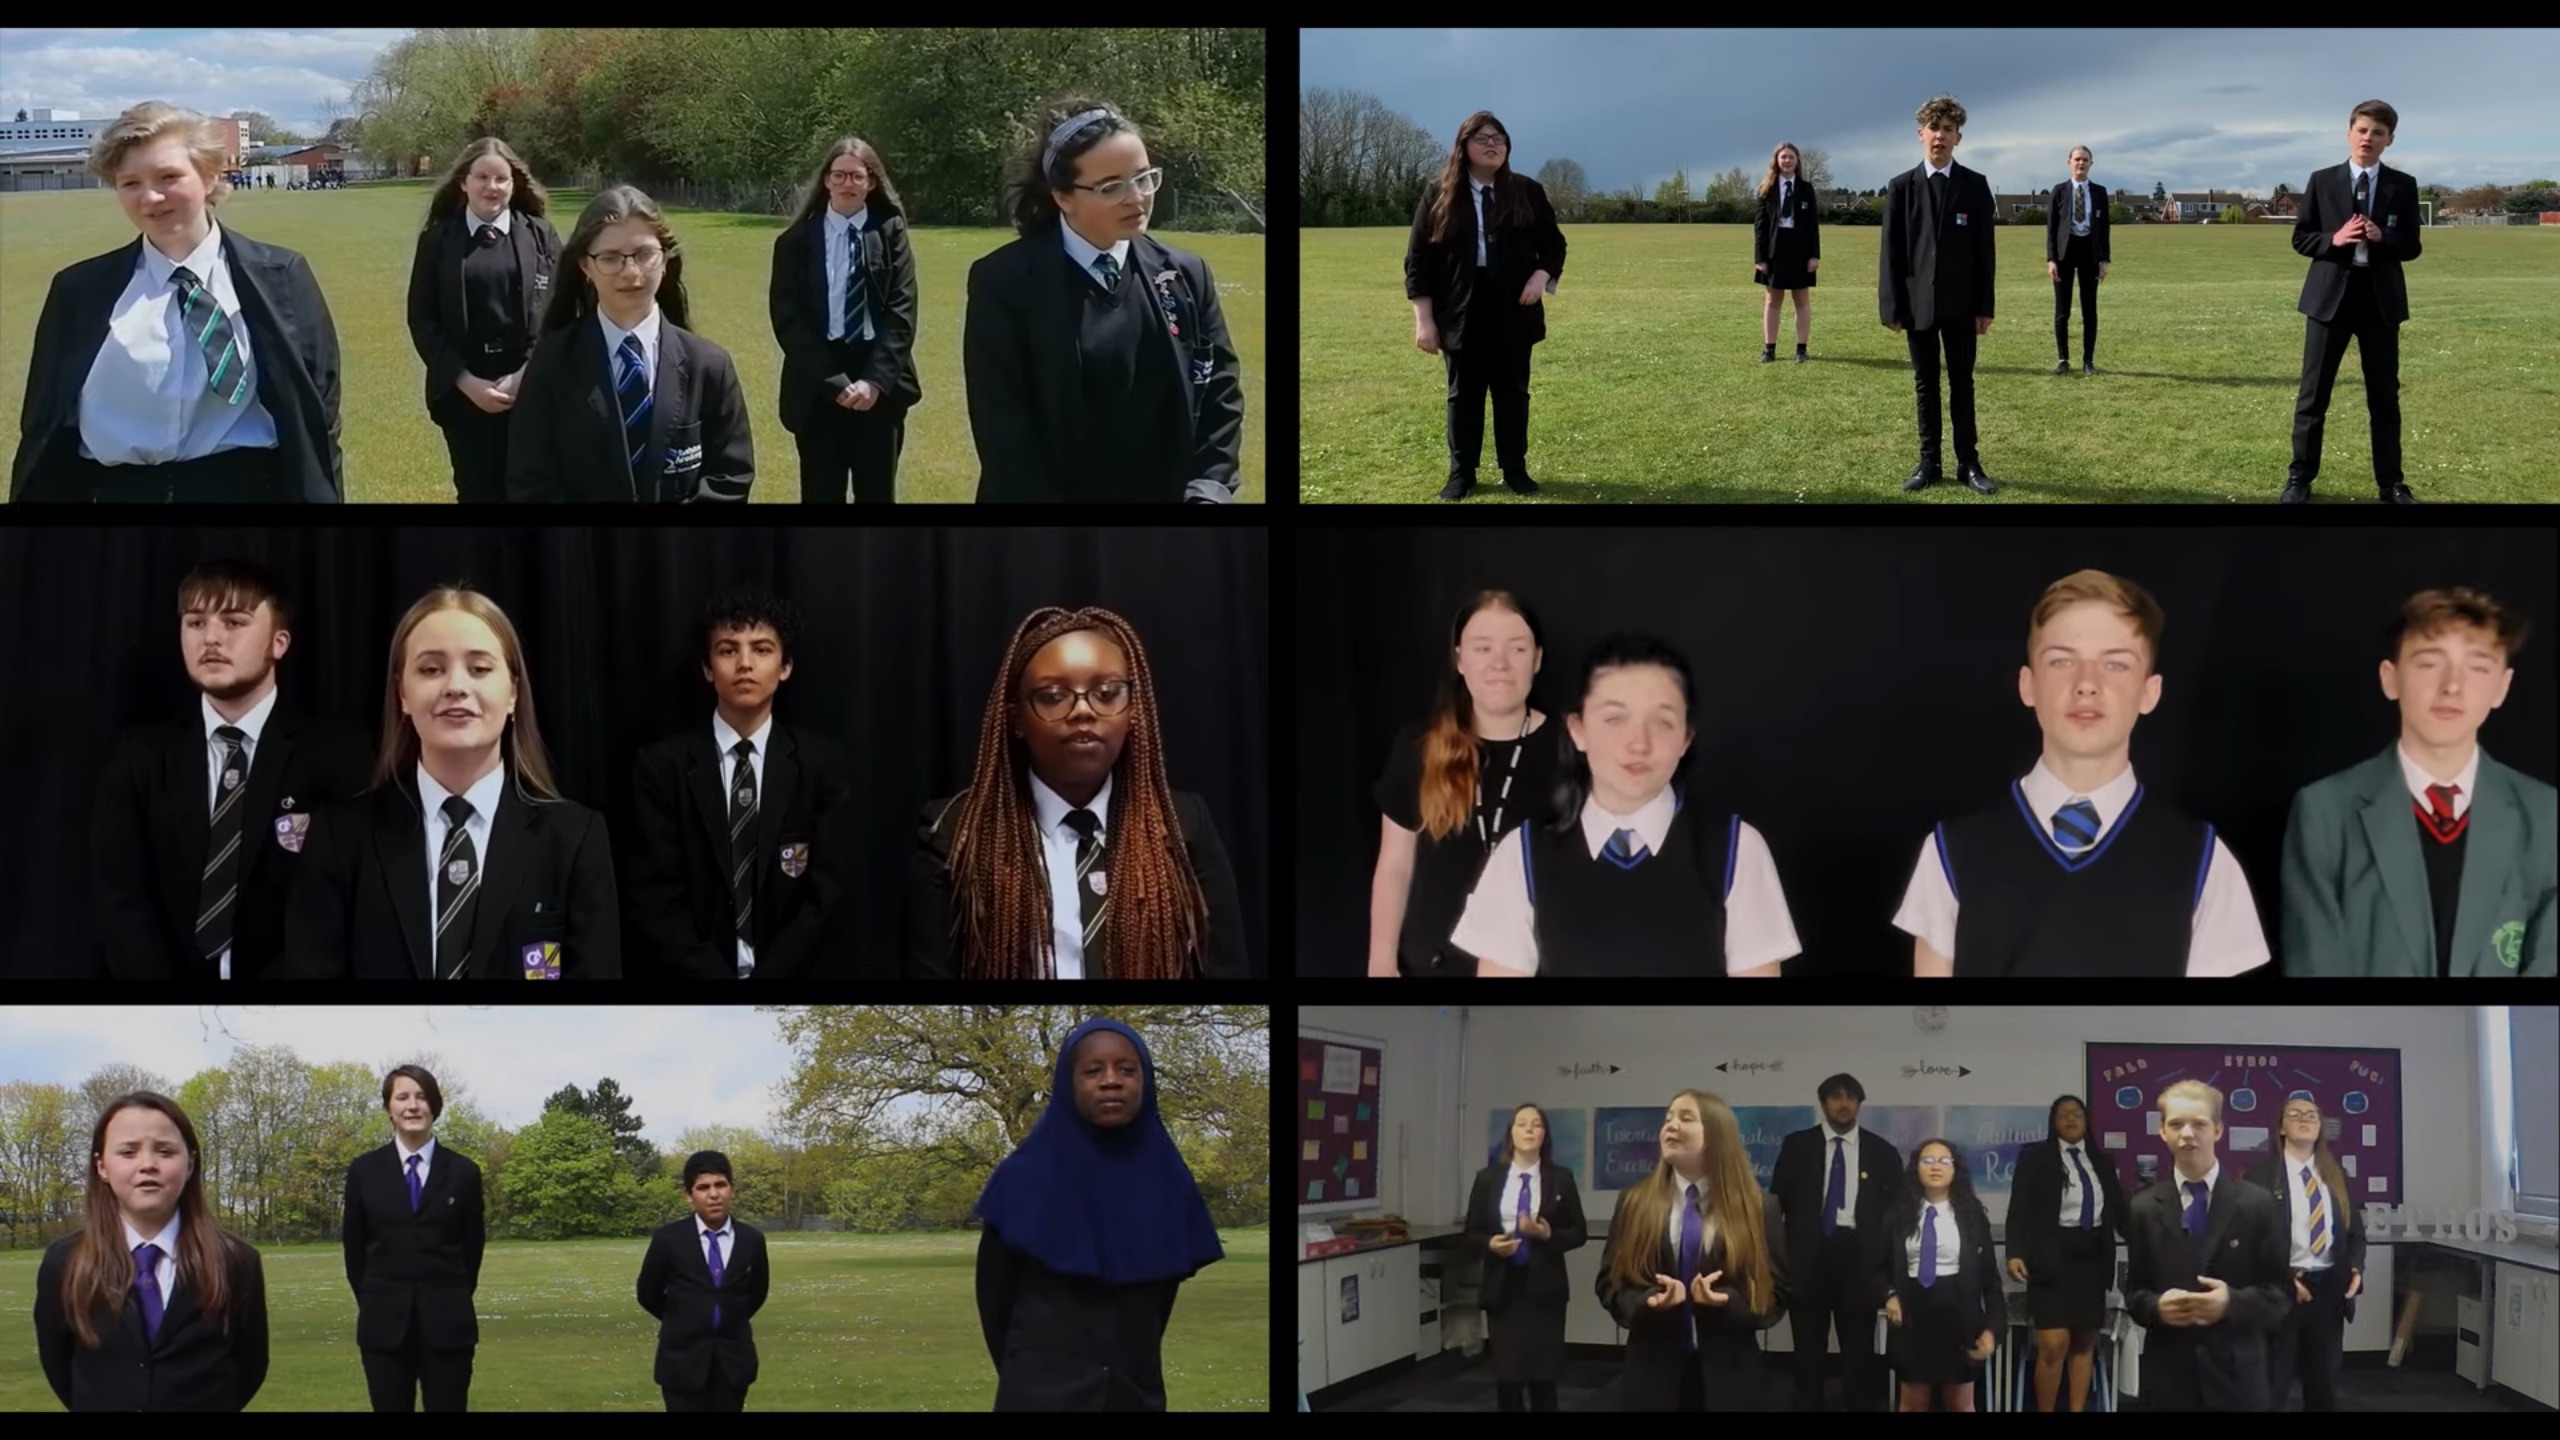 STUDENTS FROM 6 ACADEMY SCHOOLS RELEASE COLLECTIVE CHARITY SINGLE COVER OF ‘TOGETHER’ 